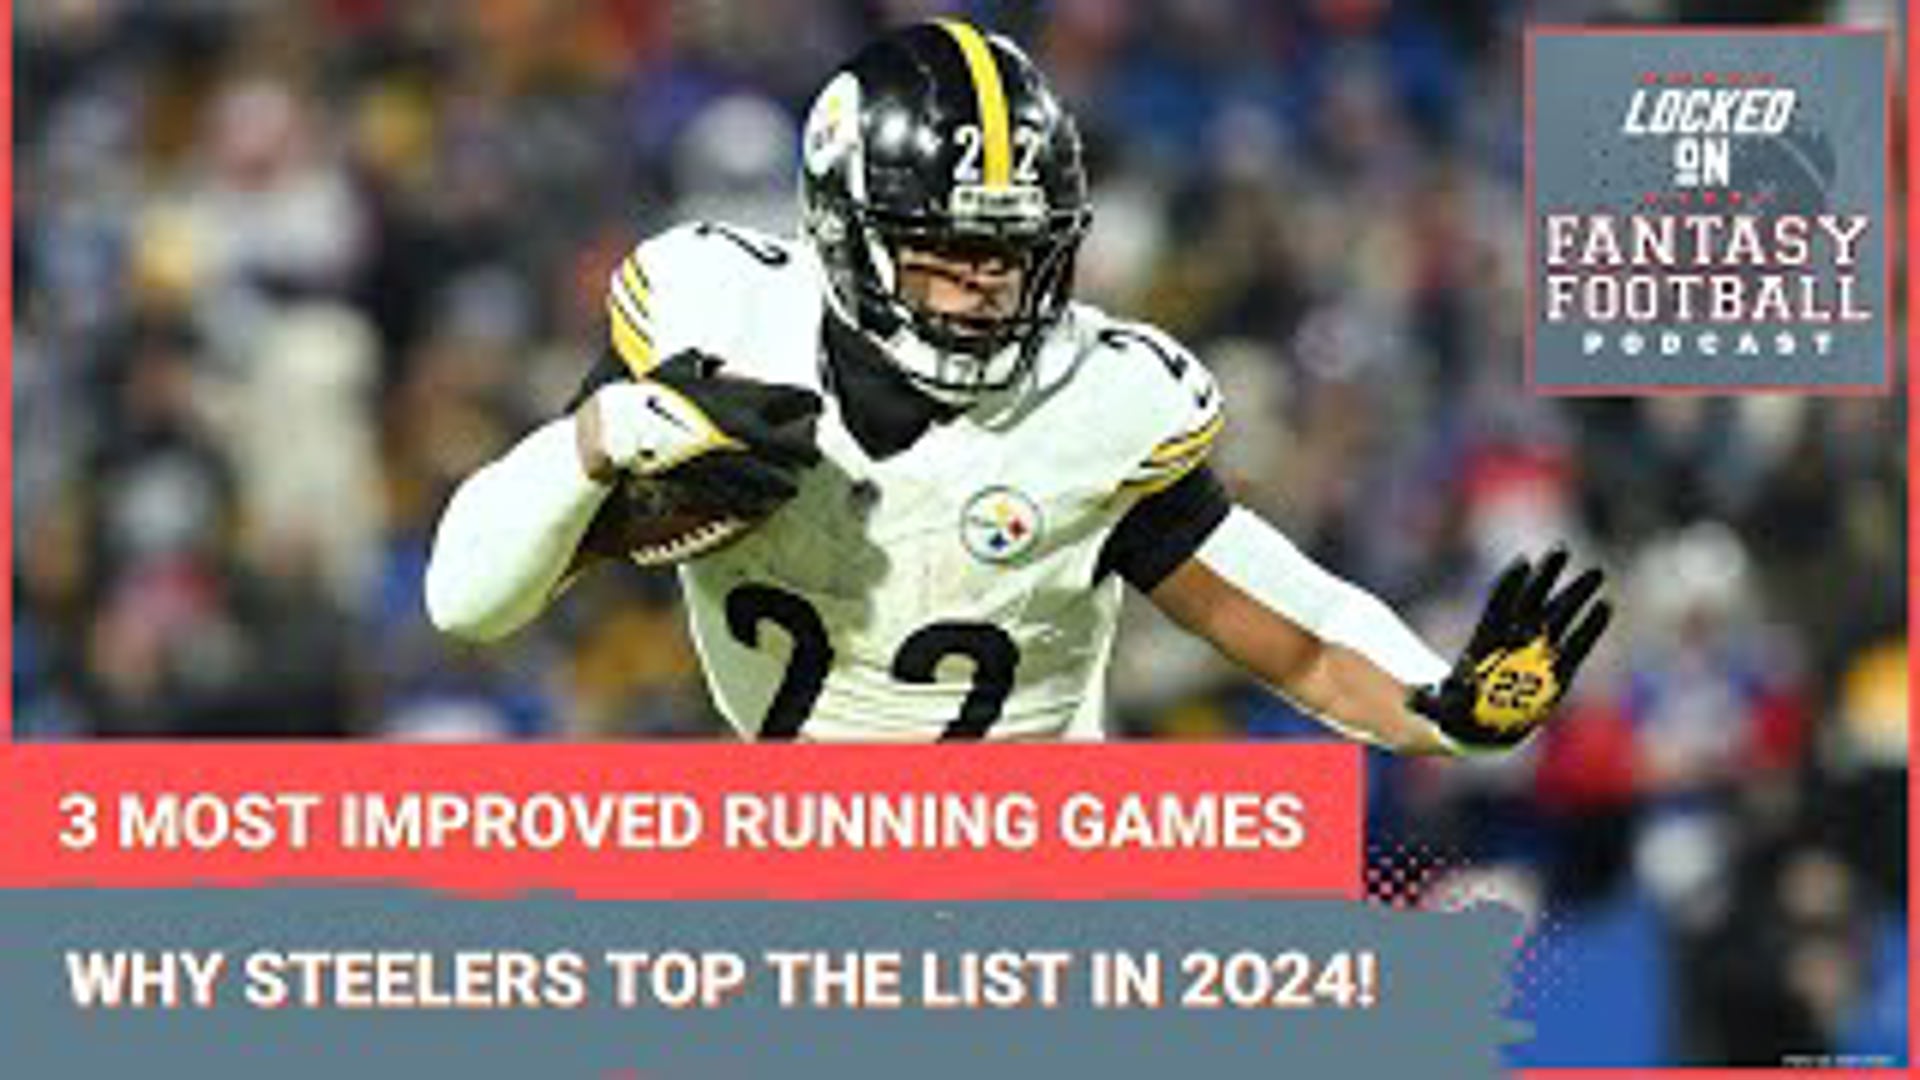 Sporting News.com's Vinnie Iyer and NFL.com's Michelle Magdziuk  break down the three most improve NFL running games to target in fantasy football drafts.